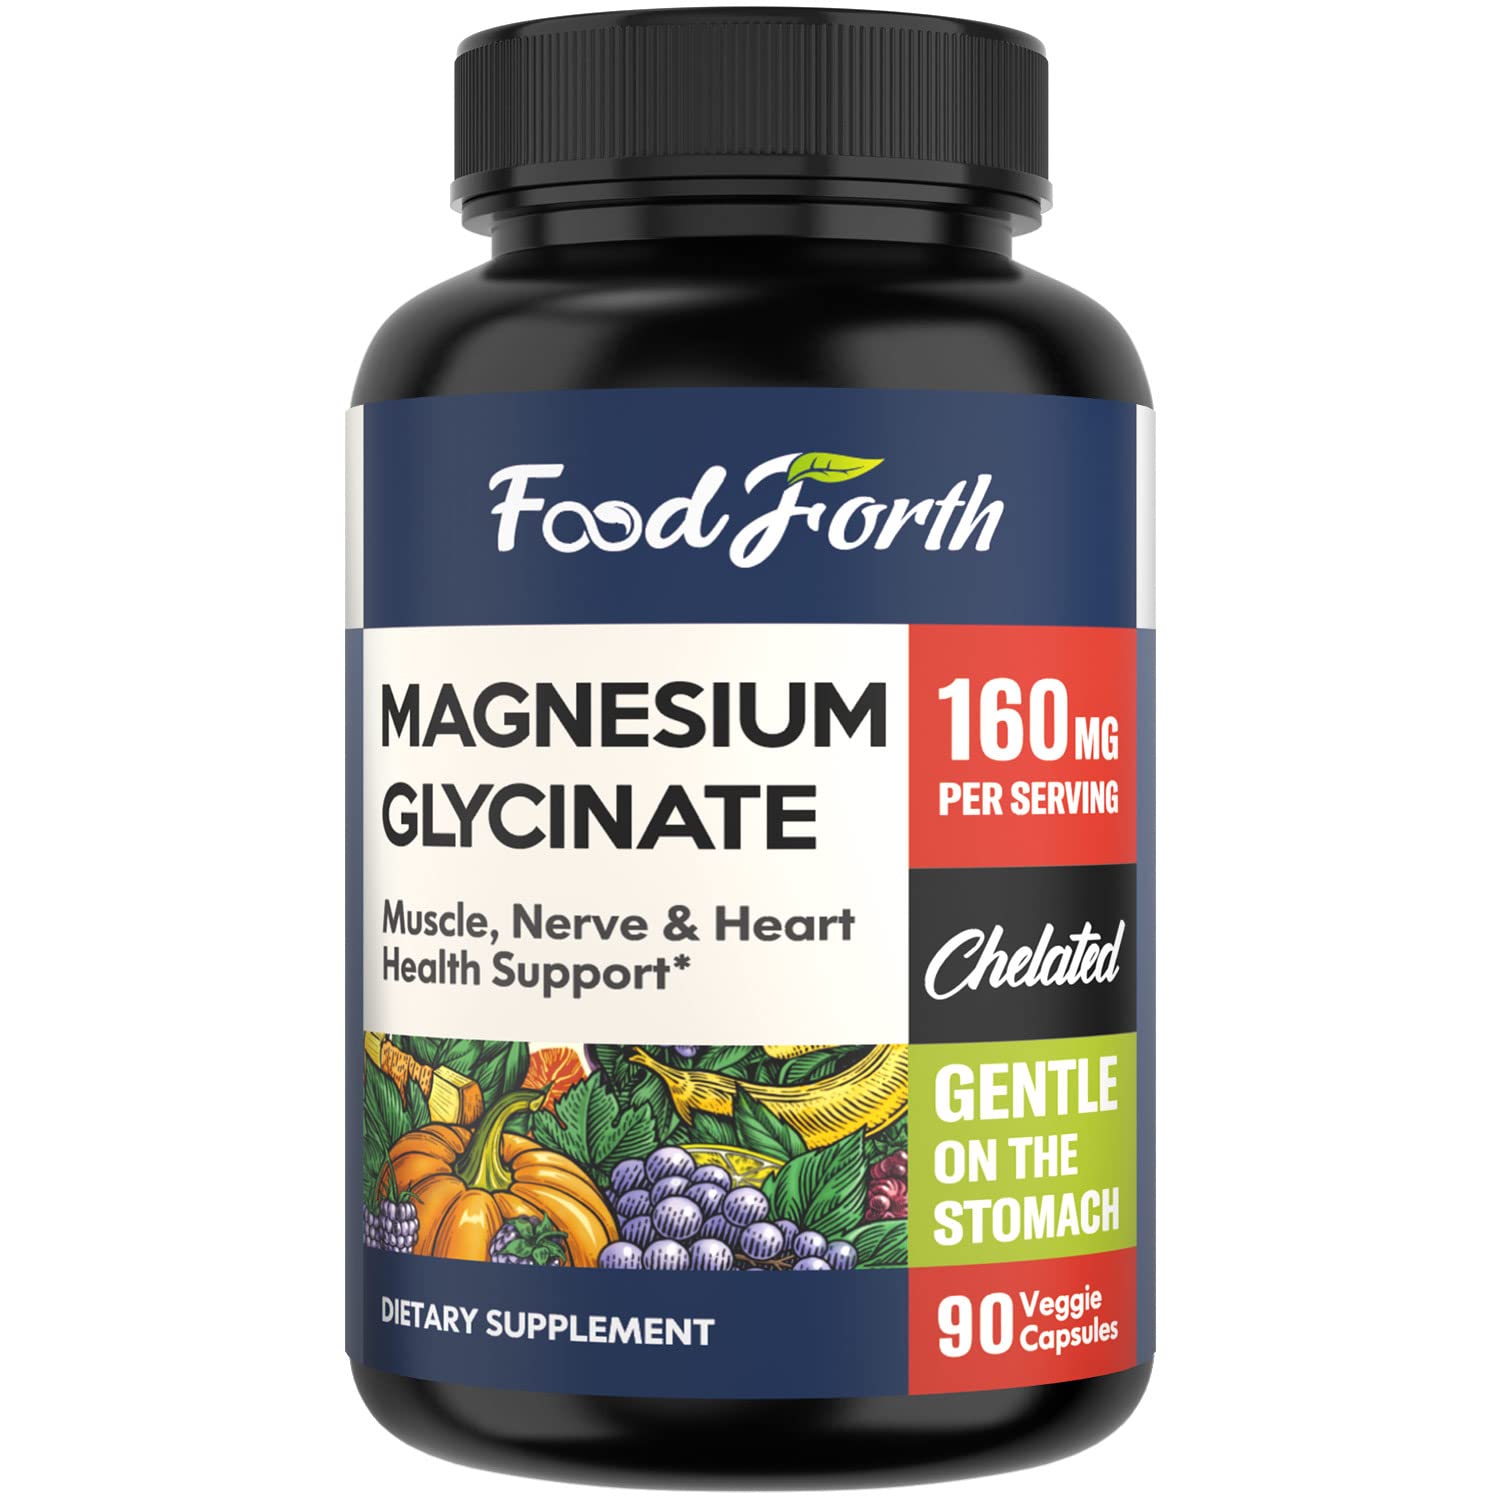 FoodForth Magnesium Glycinate, 160mg Elemental Magnesium, Chelated for Superior Absorption, Gentle on Stomach, Supports Muscle, Nerve, Heart Health, Non-GMO, No Gluten, Made in USA, 90 Veggie Capsules